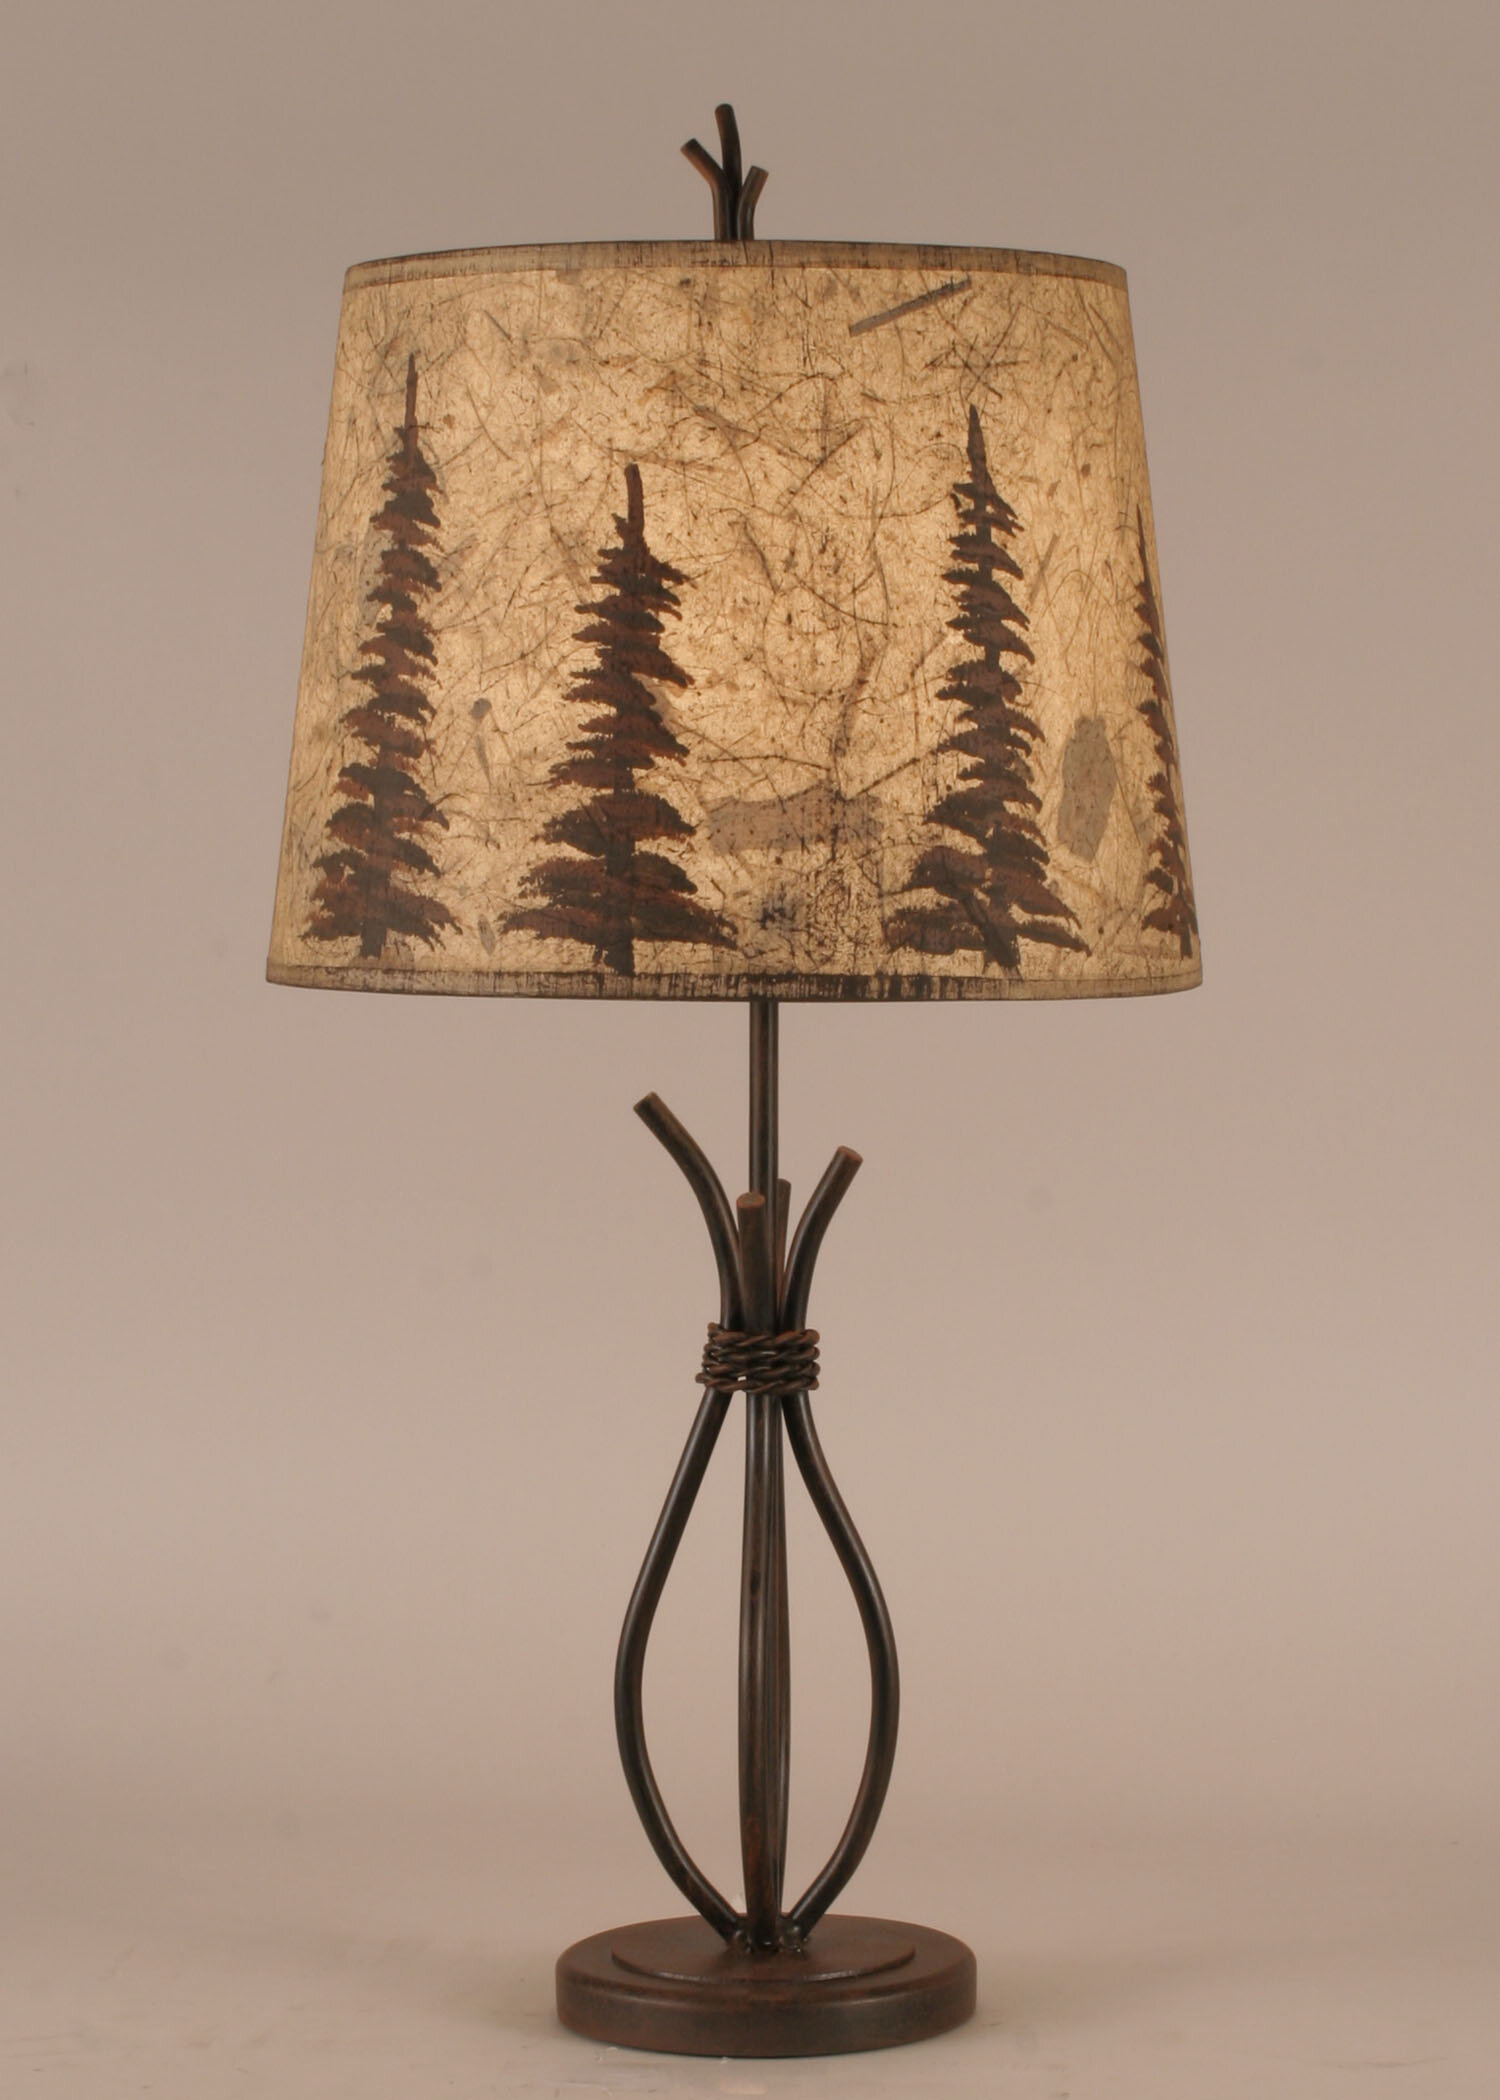 Rustic Living Iron Stack 24" H Table Lamp with Empire Shade